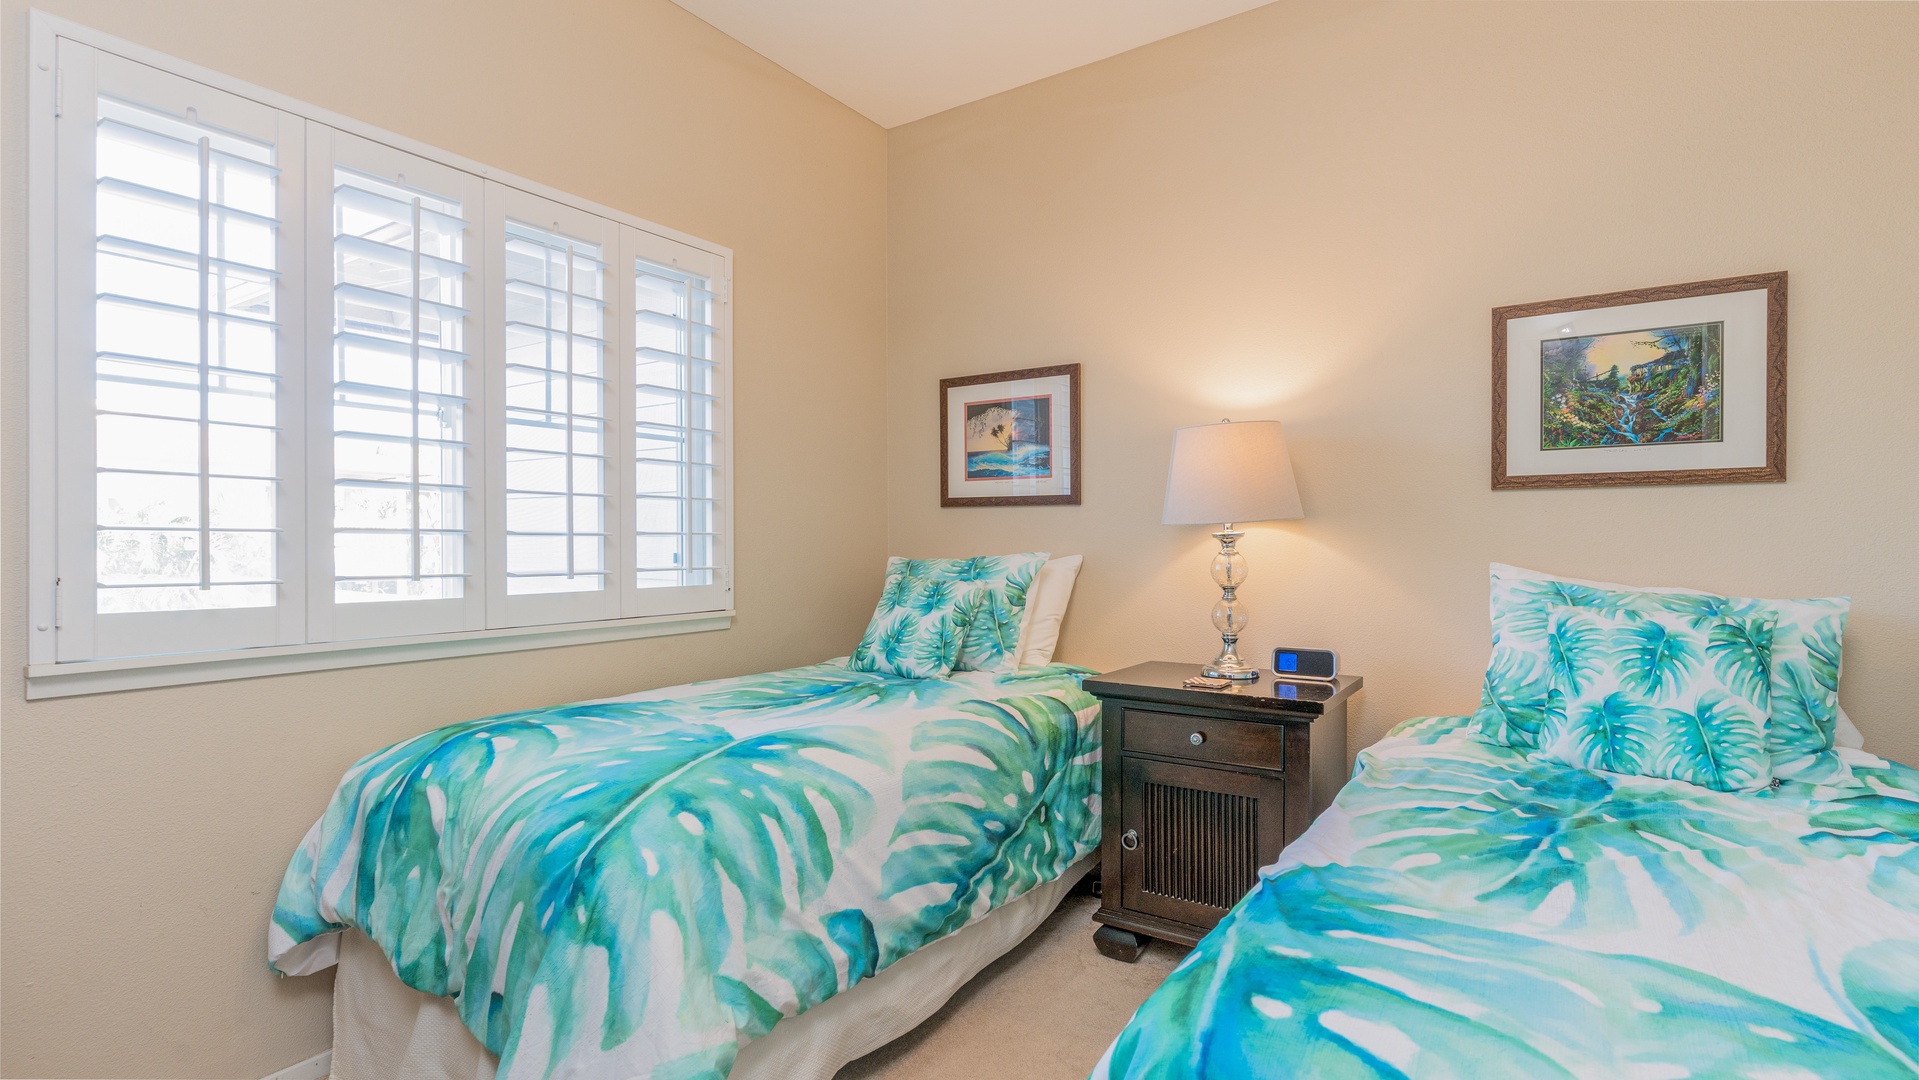 Kapolei Vacation Rentals, Coconut Plantation 1194-3 - The third guest bedroom with twin beds and a dresser.